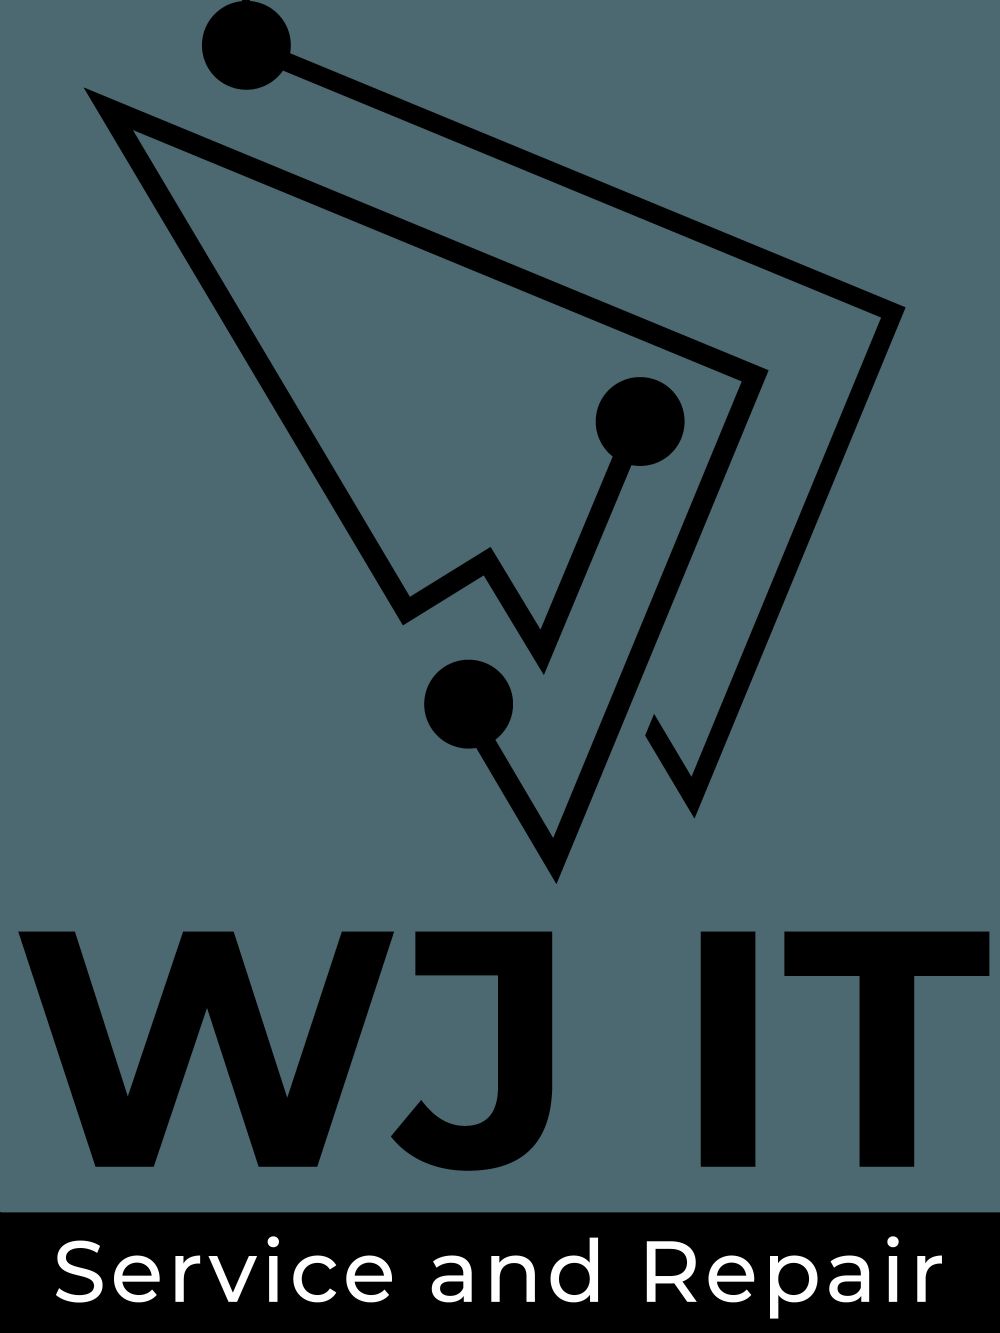 WJ IT ELECTRONIC SERVICE AND REPAIR